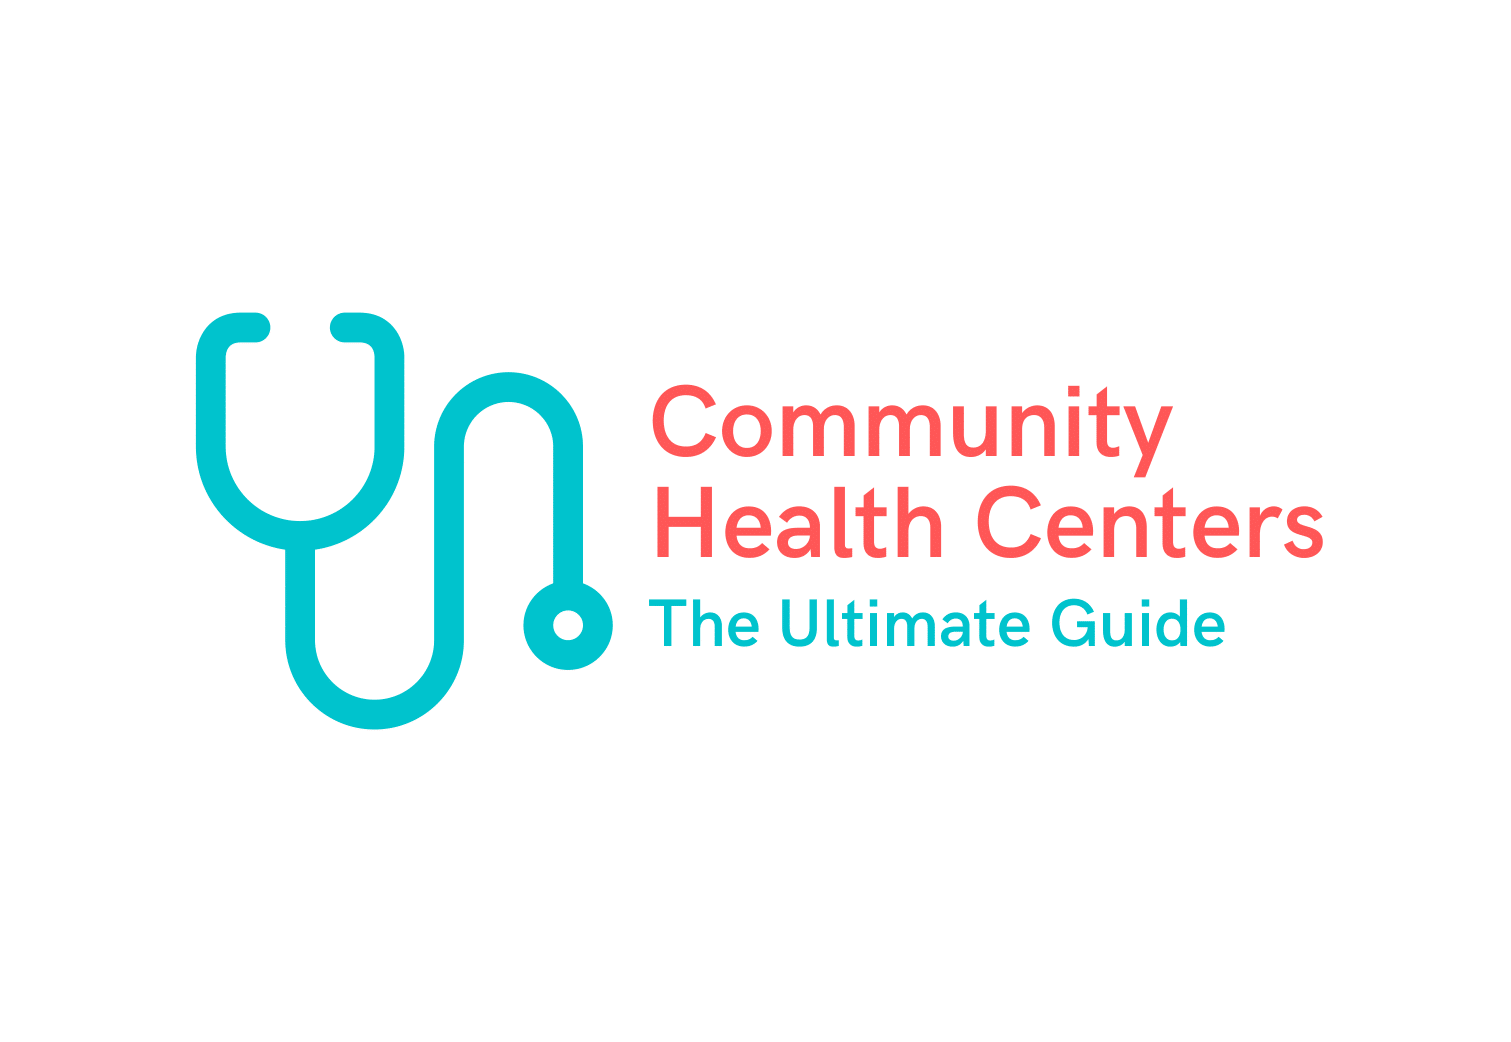 The Ultimate Guide to Community Health Centers